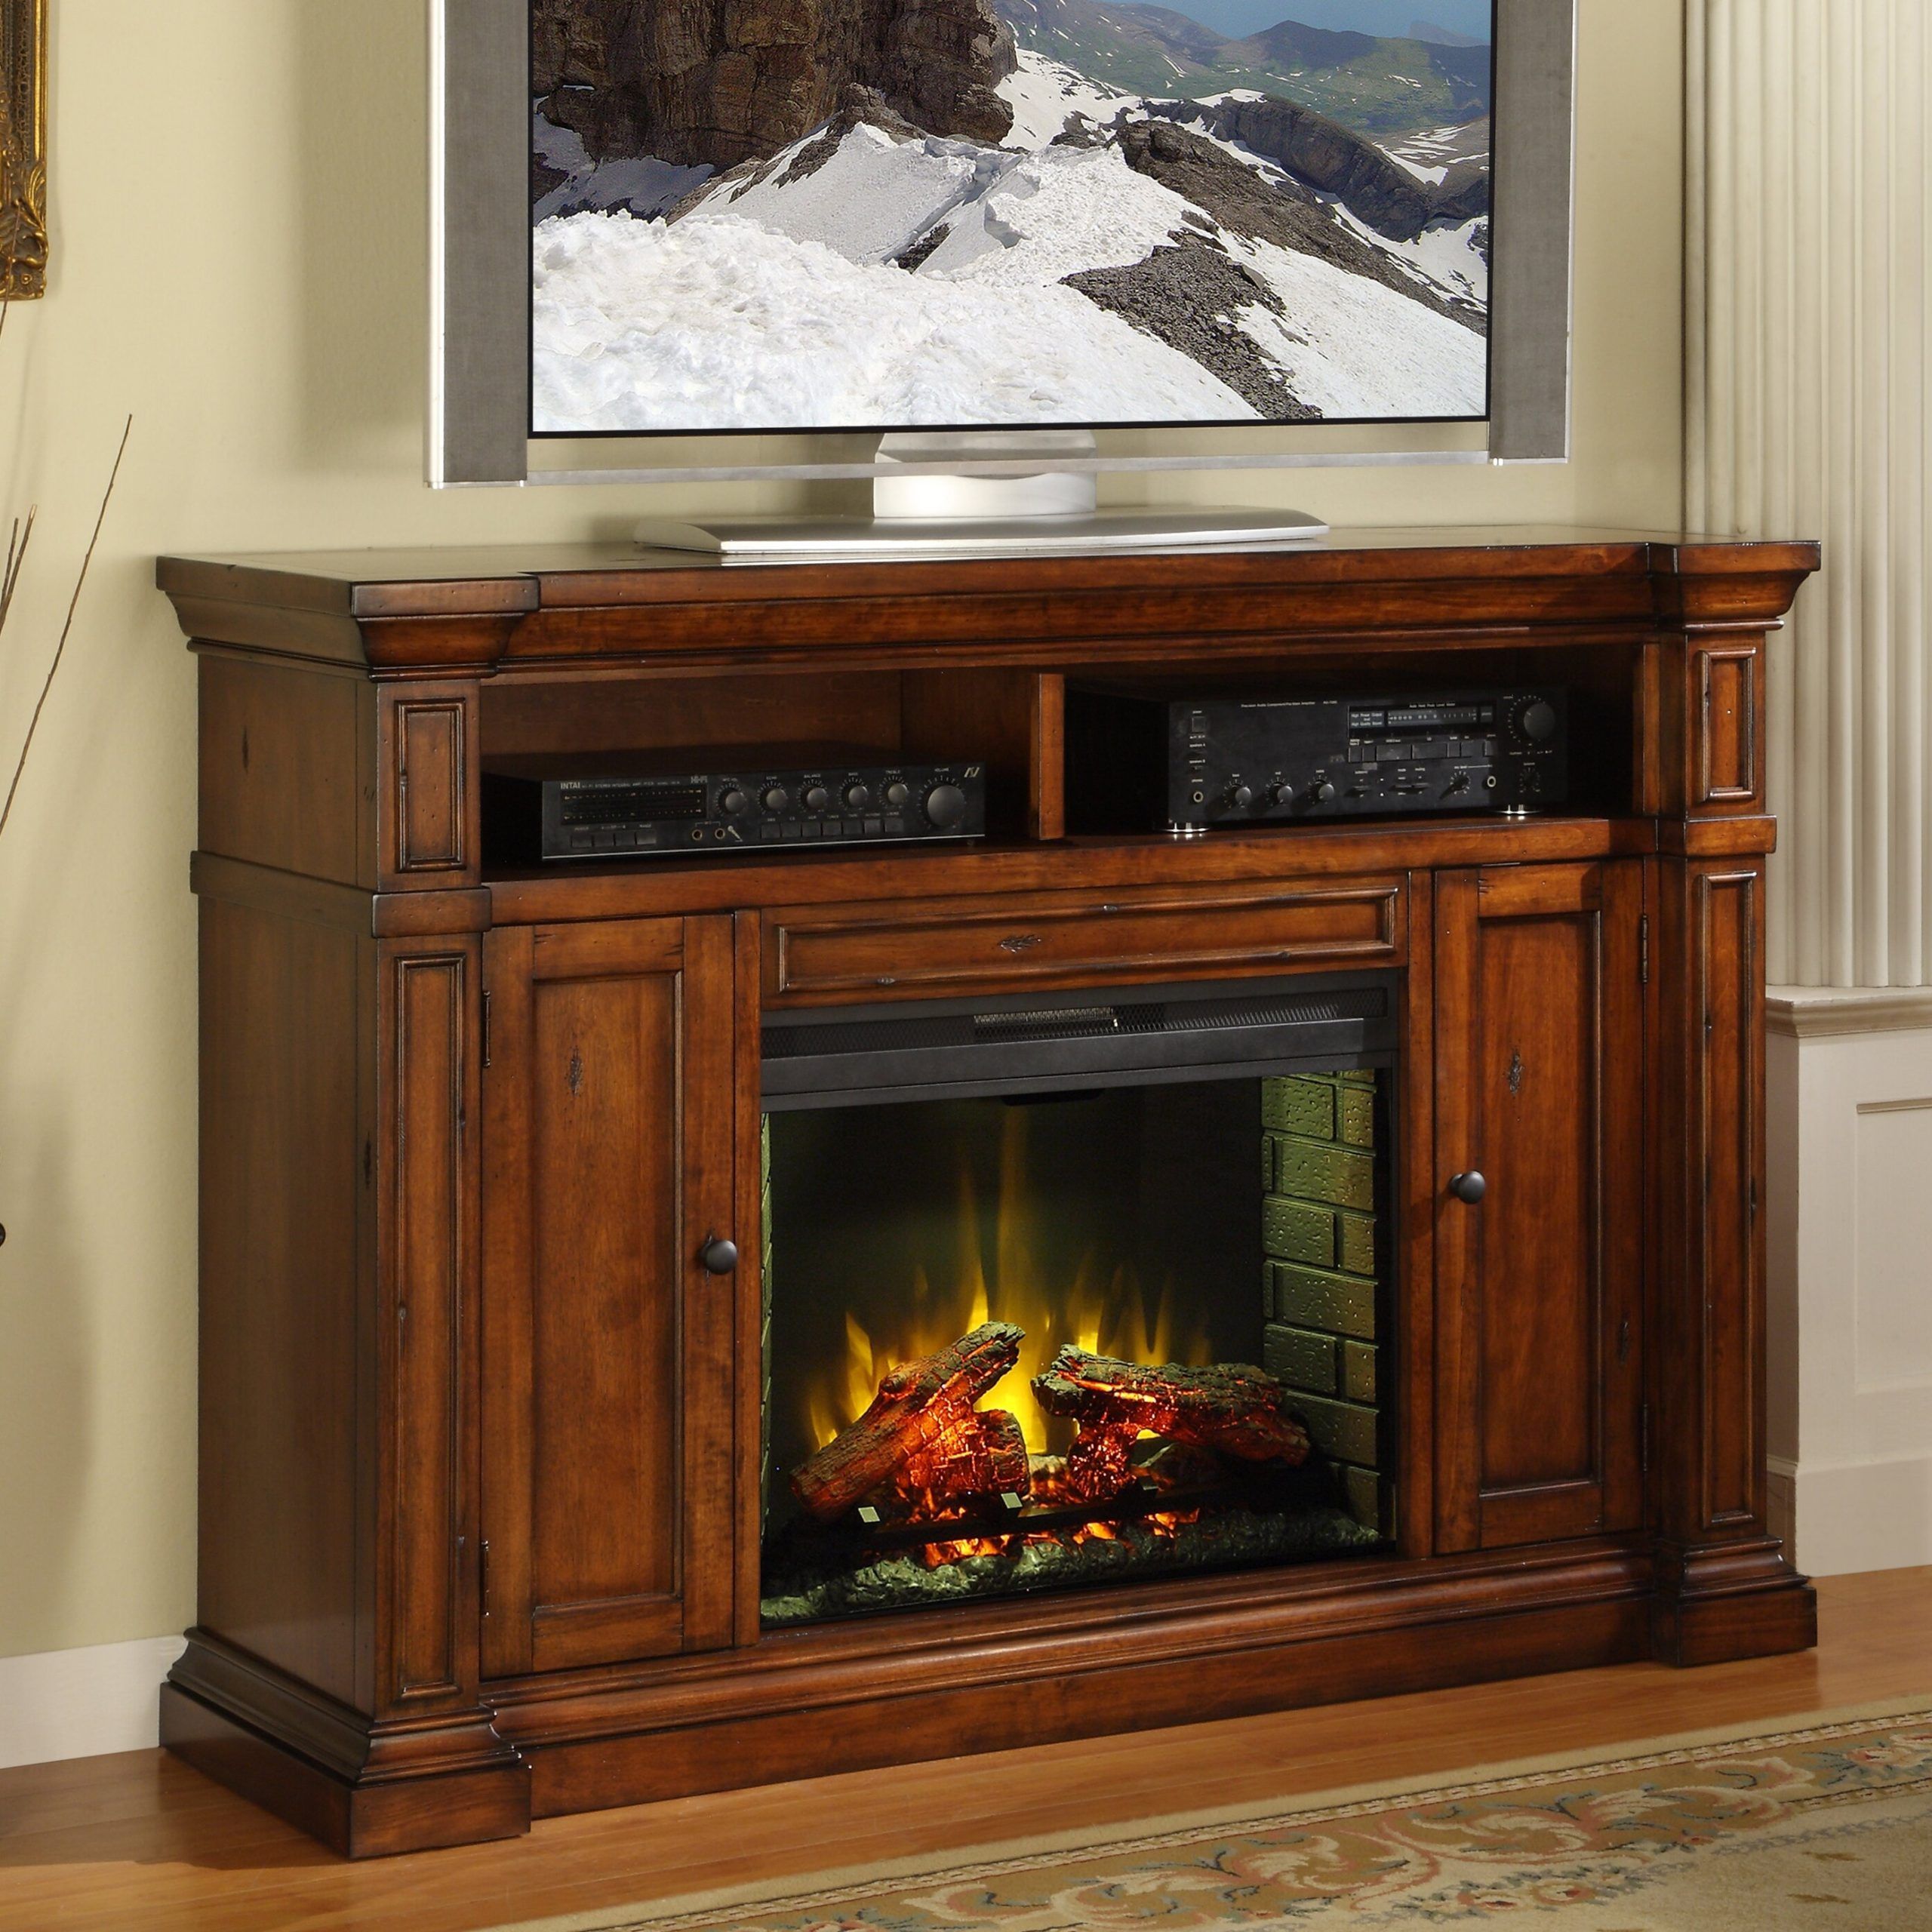 Legends Furniture Berkshire Tv Stand With Electric Fireplace & Reviews Throughout Electric Fireplace Tv Stands (View 16 of 20)